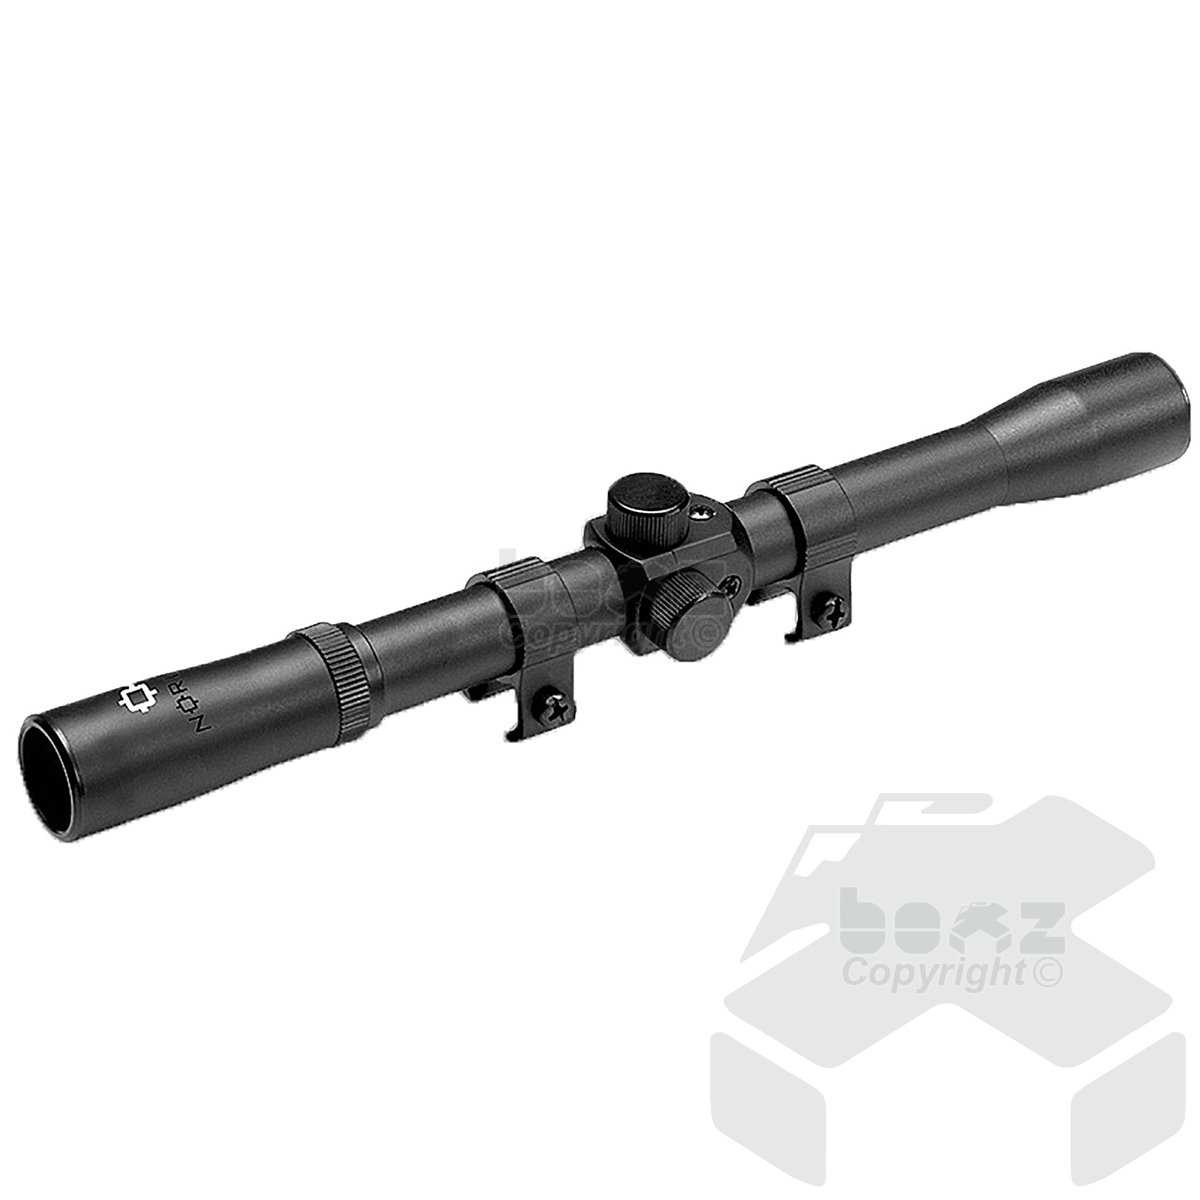 Norica Scope 4x20 with Two-piece Mounts